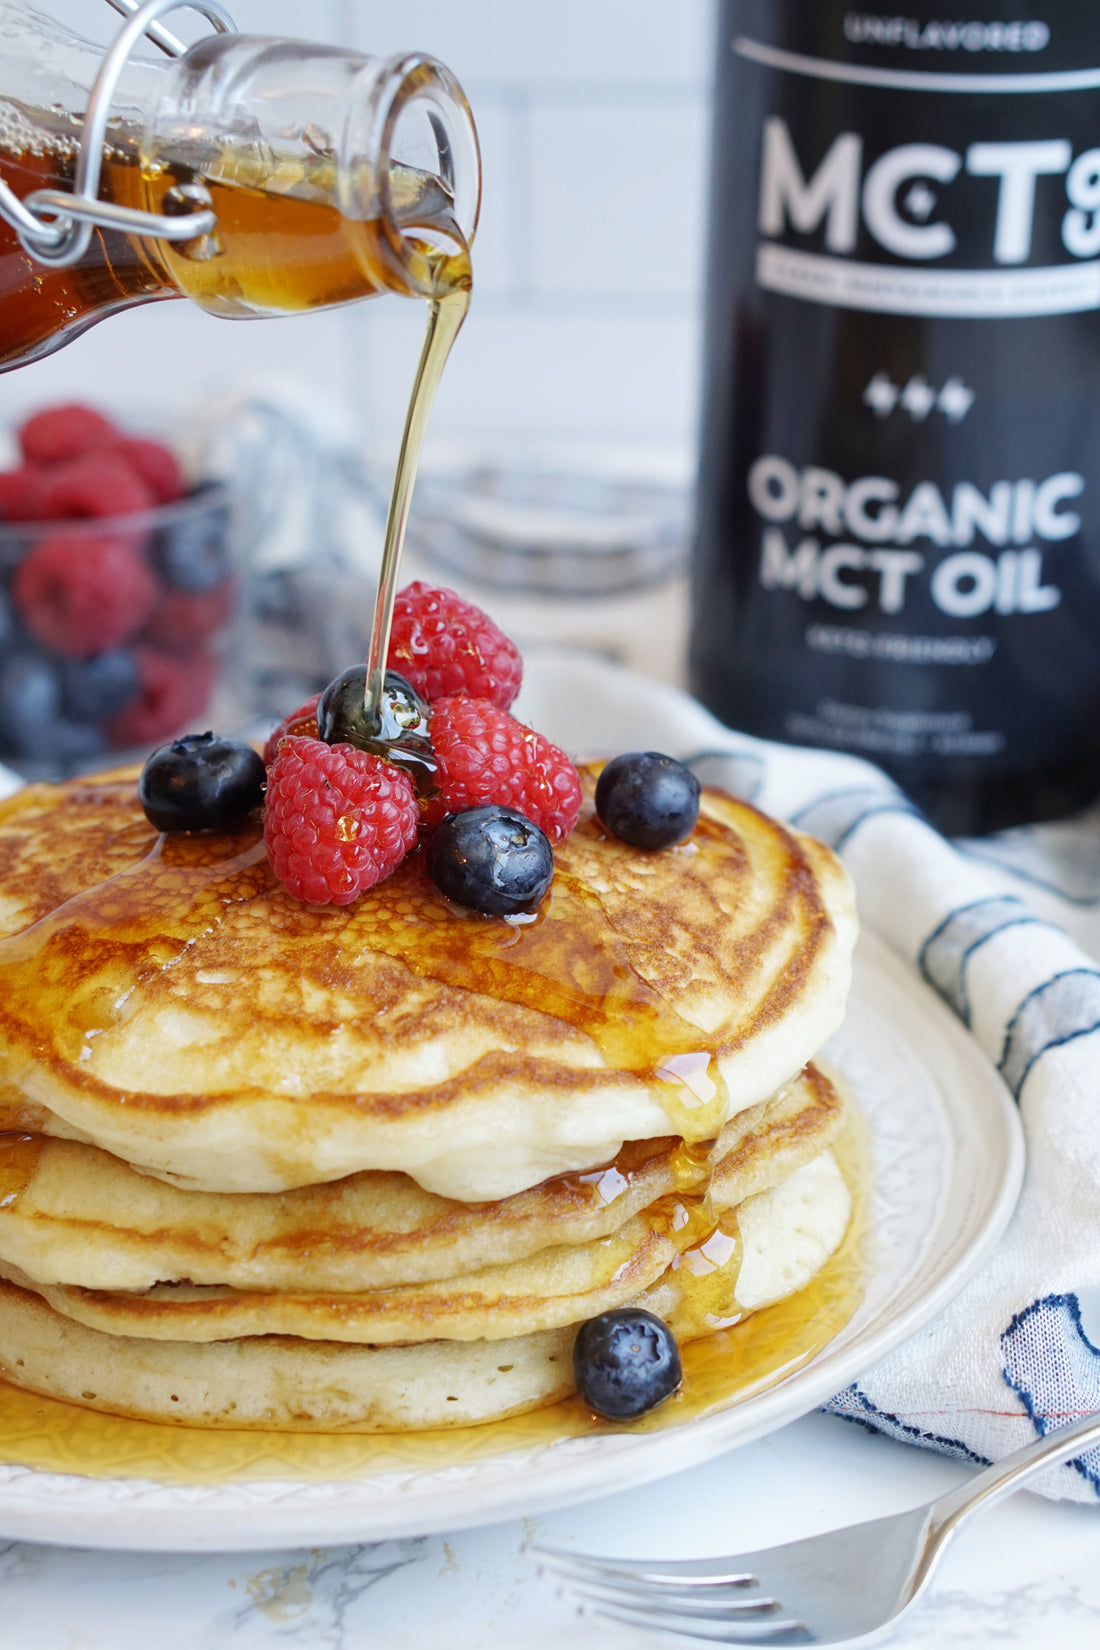 The Best Keto-Friendly Sunday Pancakes with MCToil